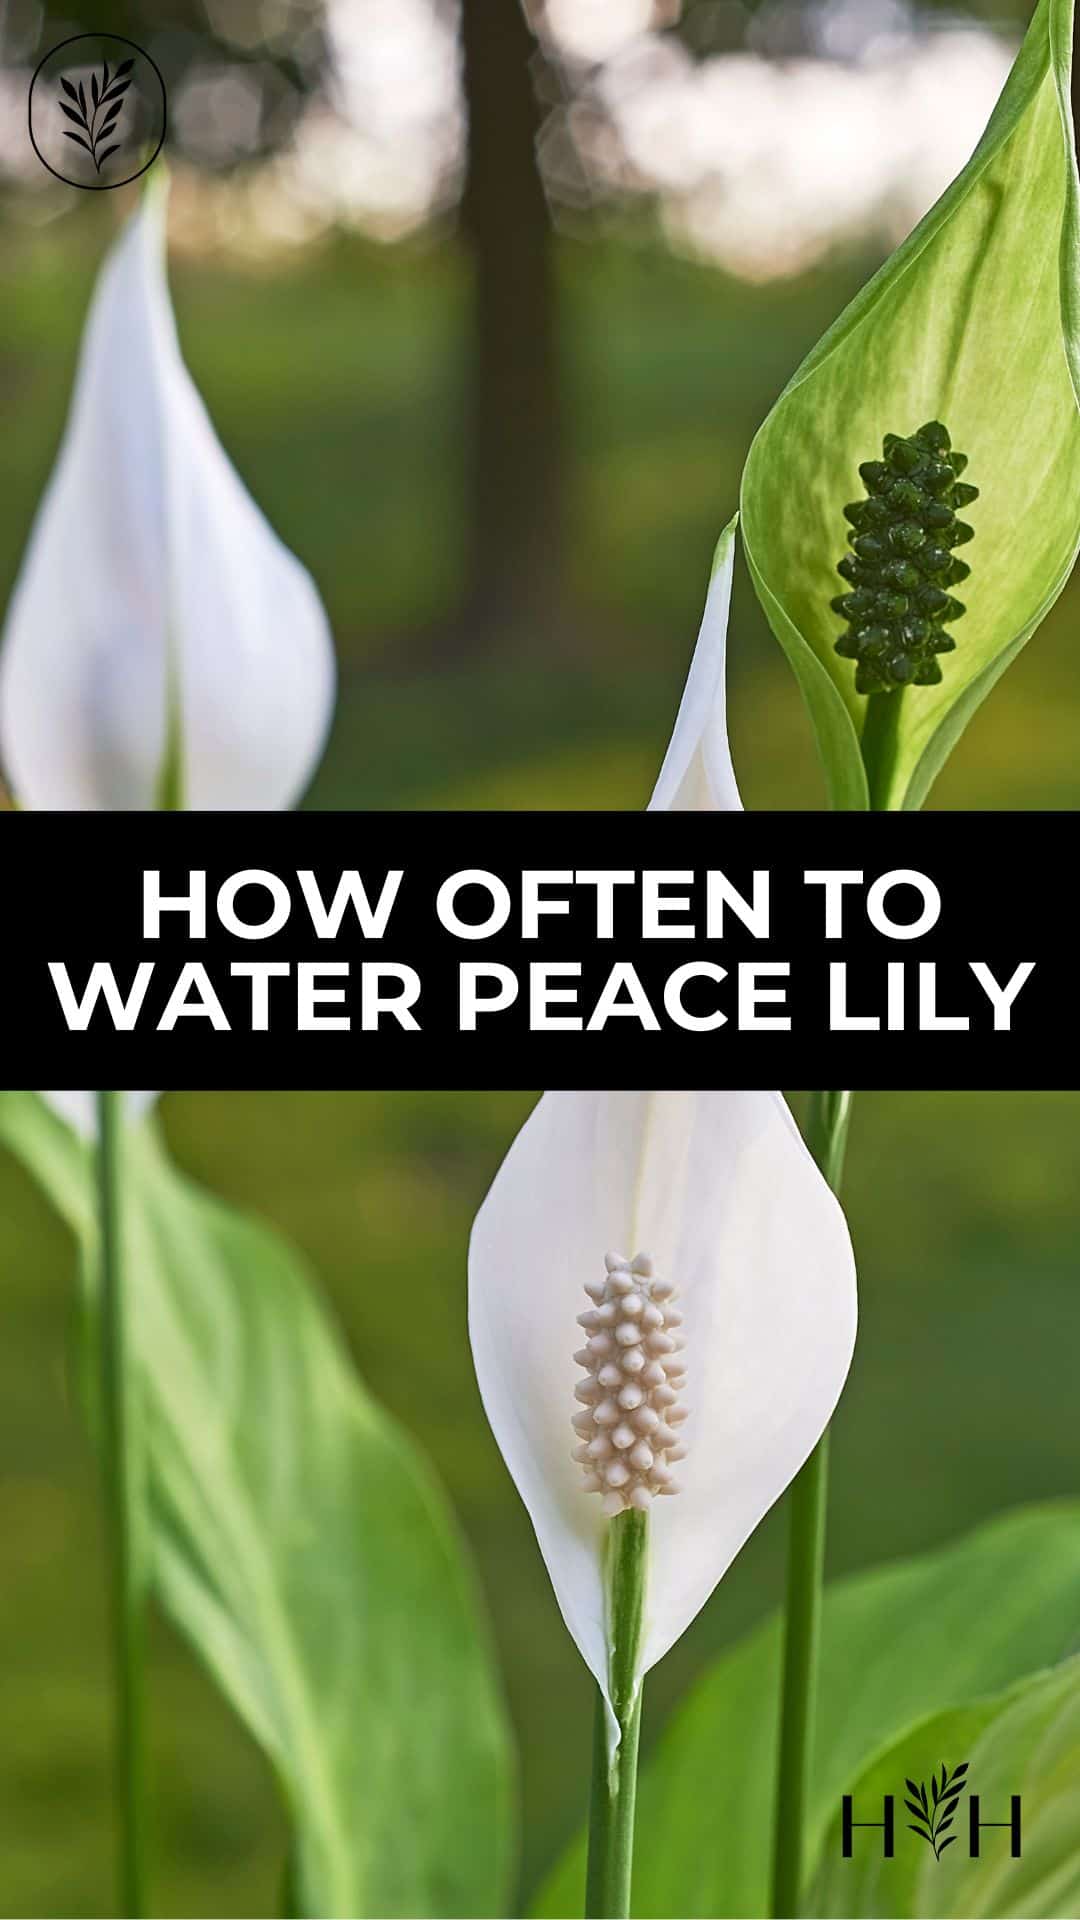 How often to water peace lily via @home4theharvest